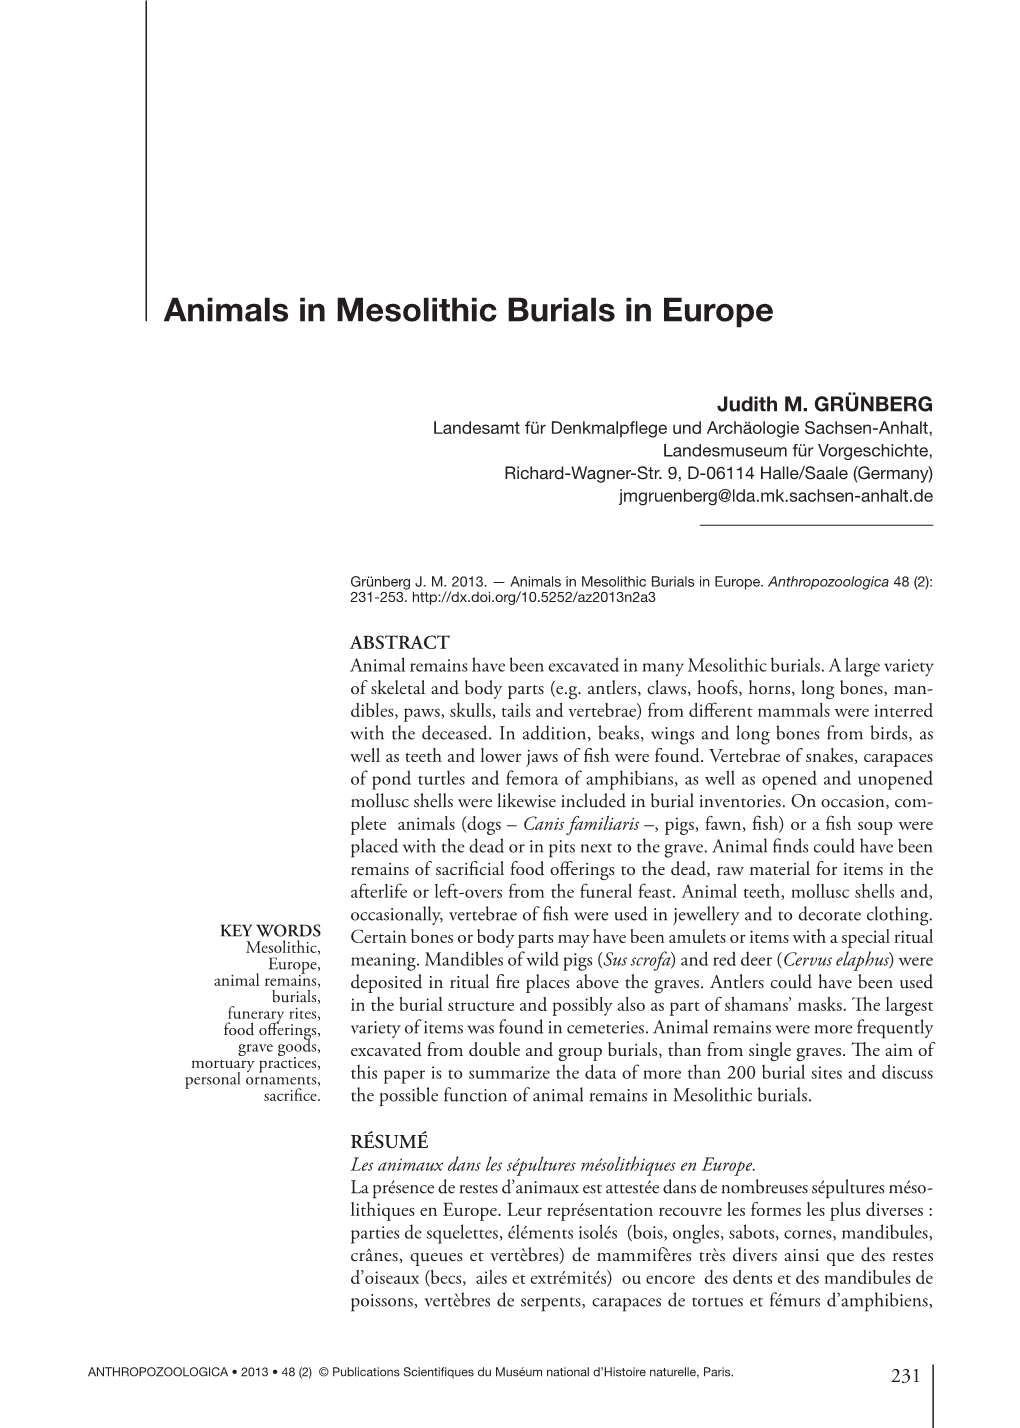 Animals in Mesolithic Burials in Europe